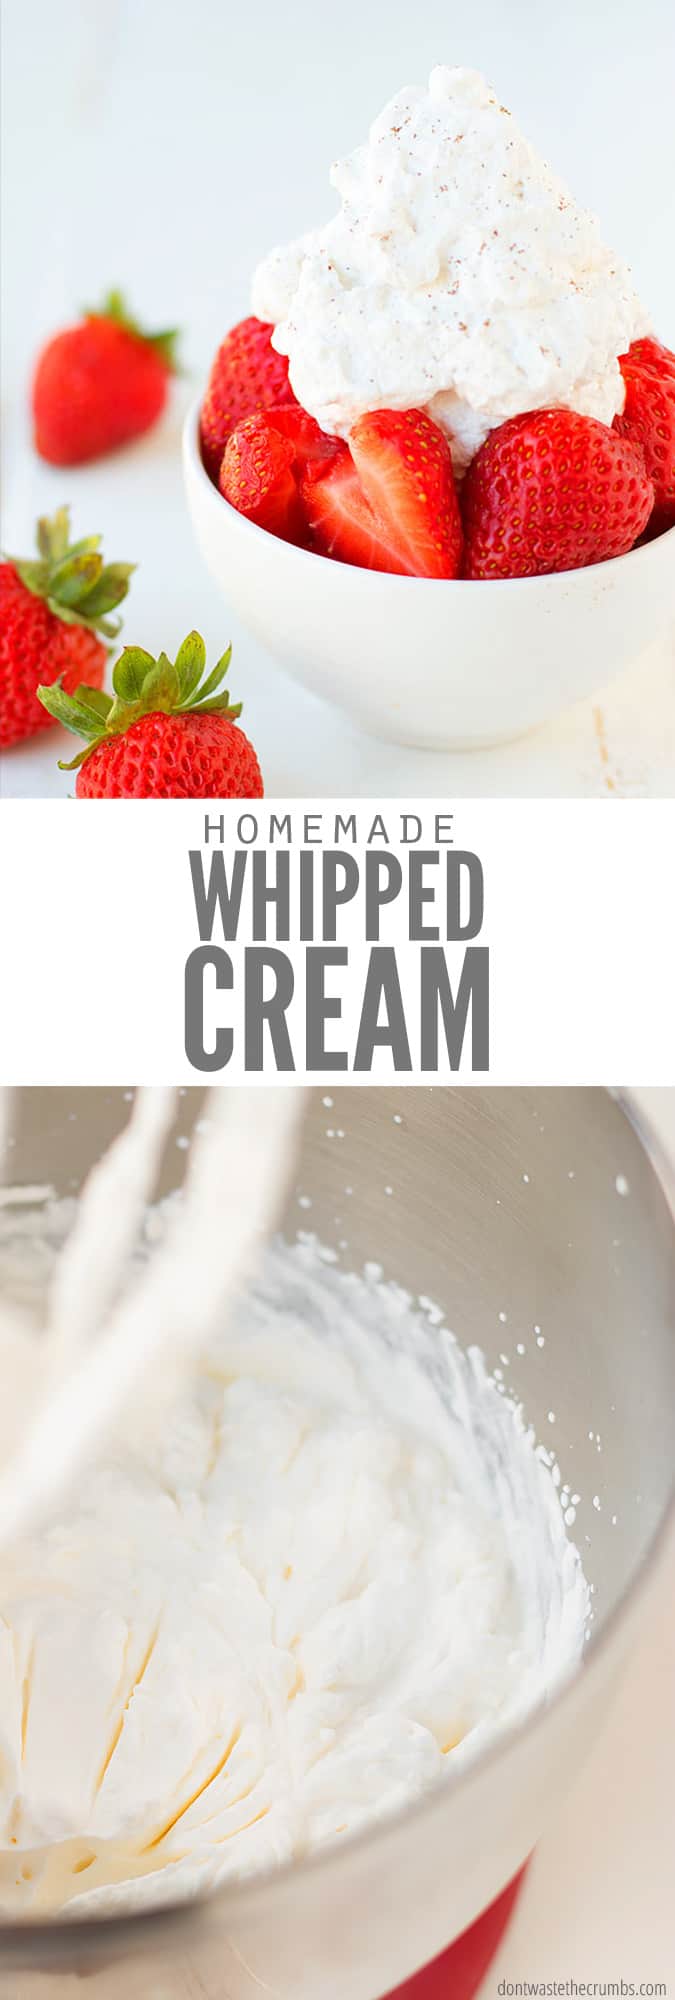 homemade whipped cream recipe without heavy cream